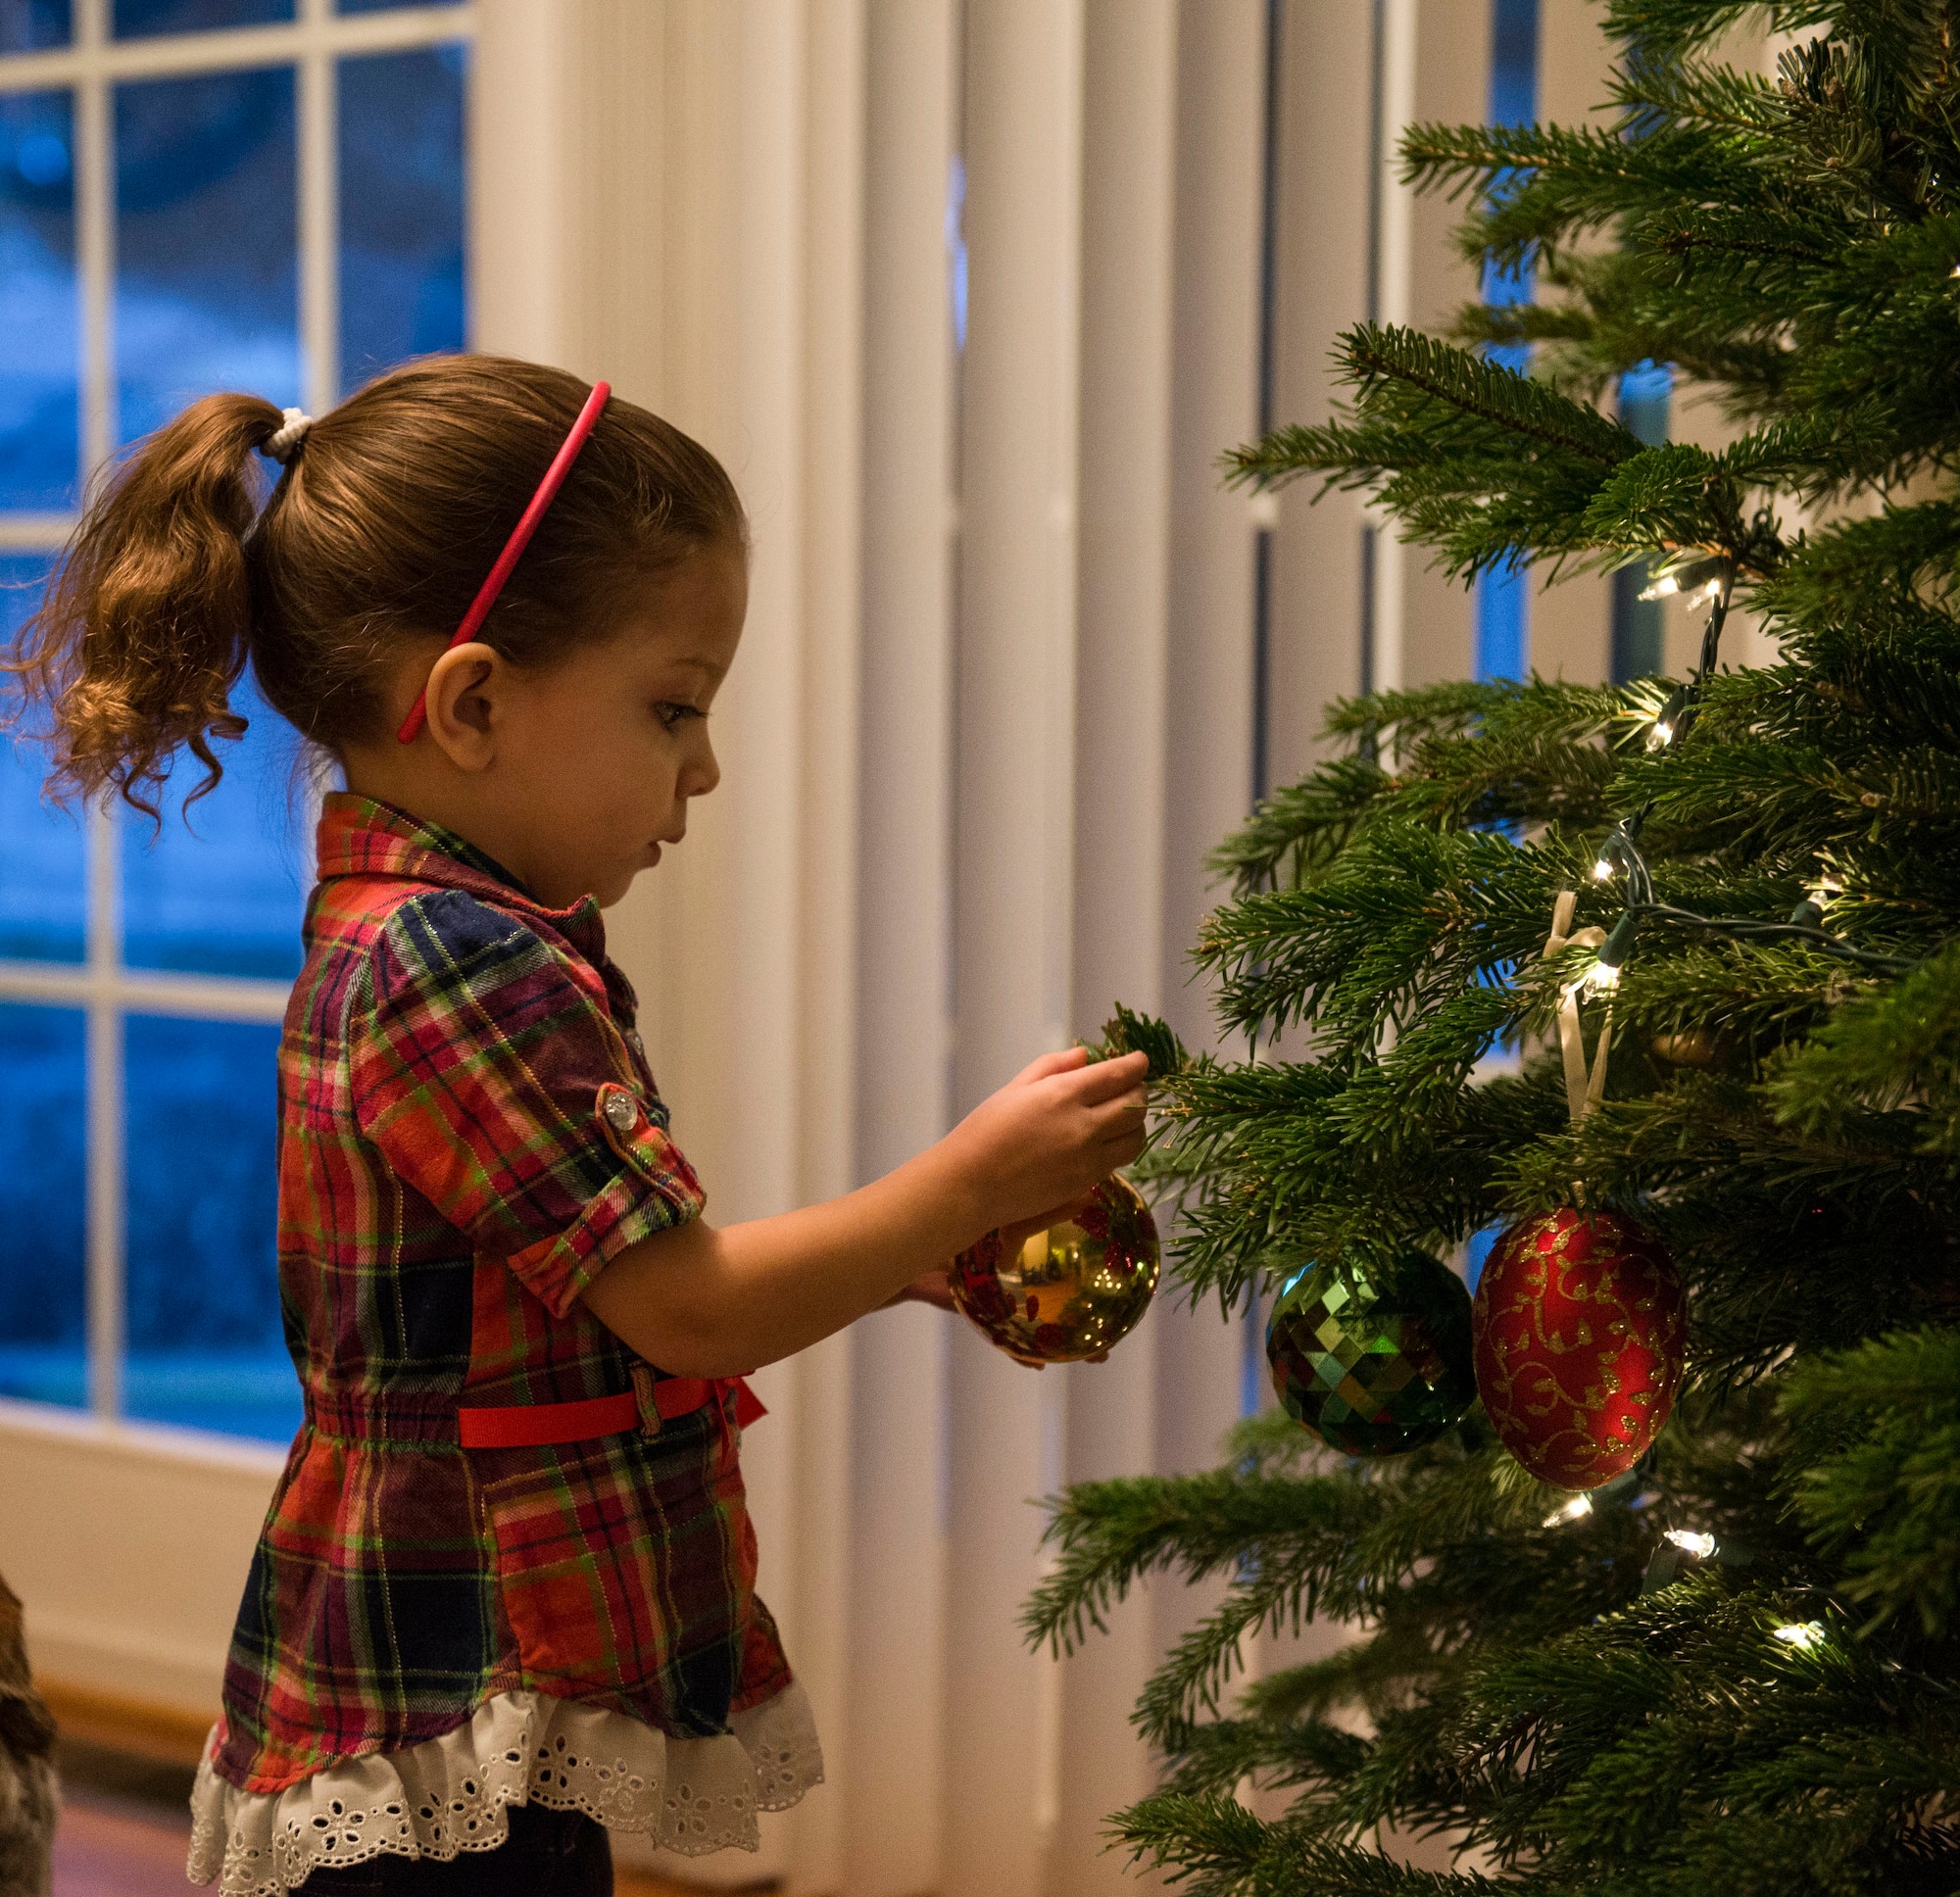 Yai Payne hangs an ornament on her family Christmas tree in Mountain Home, Idaho, Dec. 5, 2015. For Yai, this is the first time she has been separated from her mother due to a deployment. (U.S. Air Force photo by Airman 1st Class Jessica H. Evans/RELEASED)